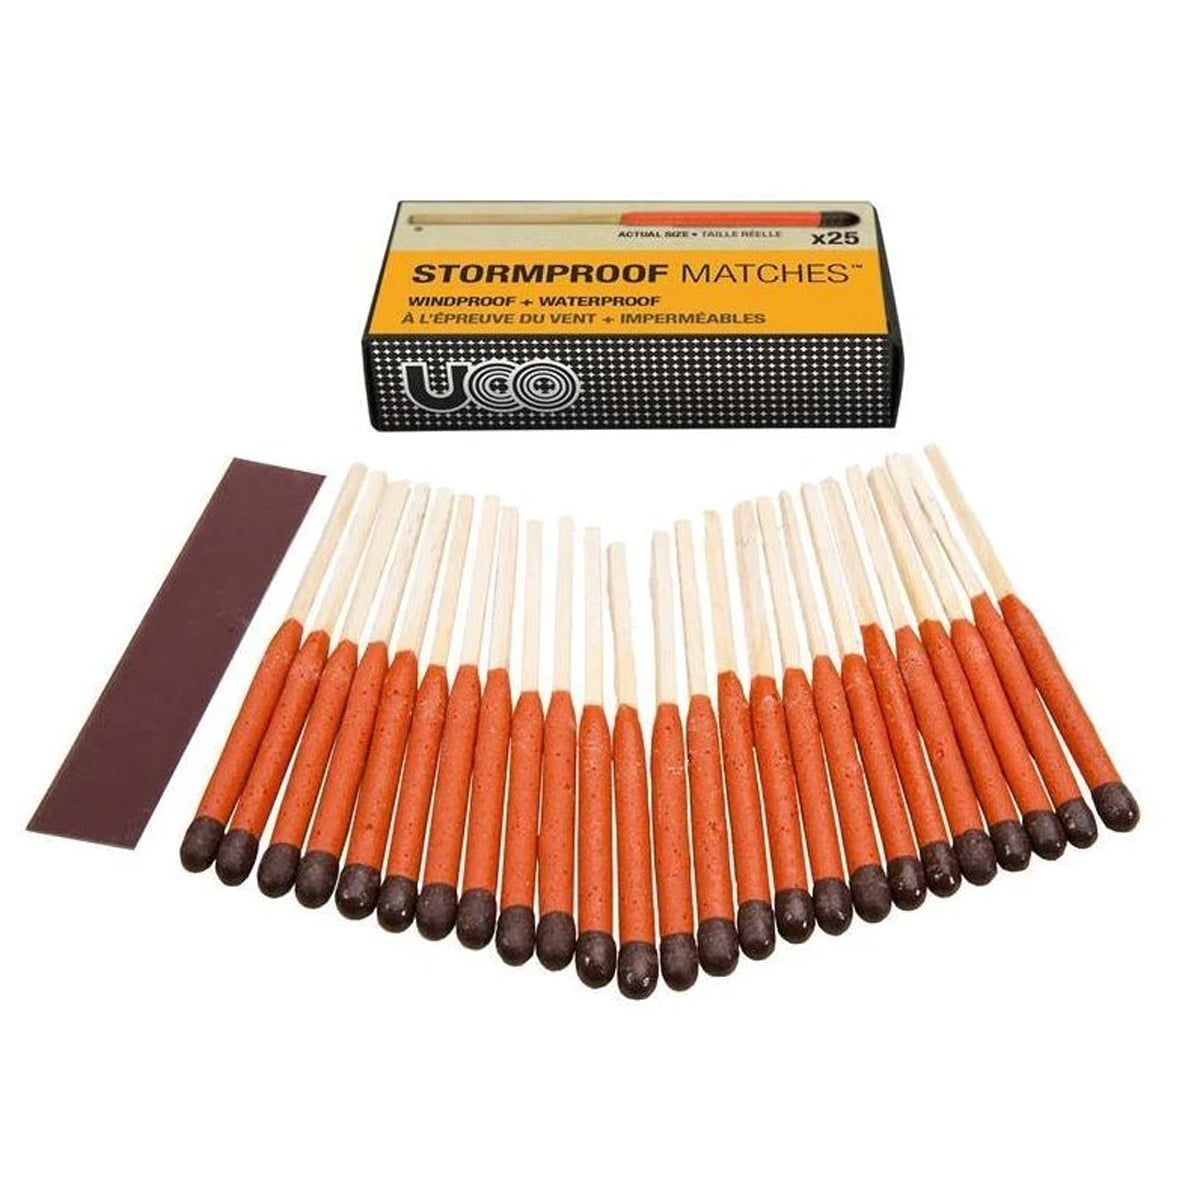 UCO Stormproof Matches - Wind & Water Proof